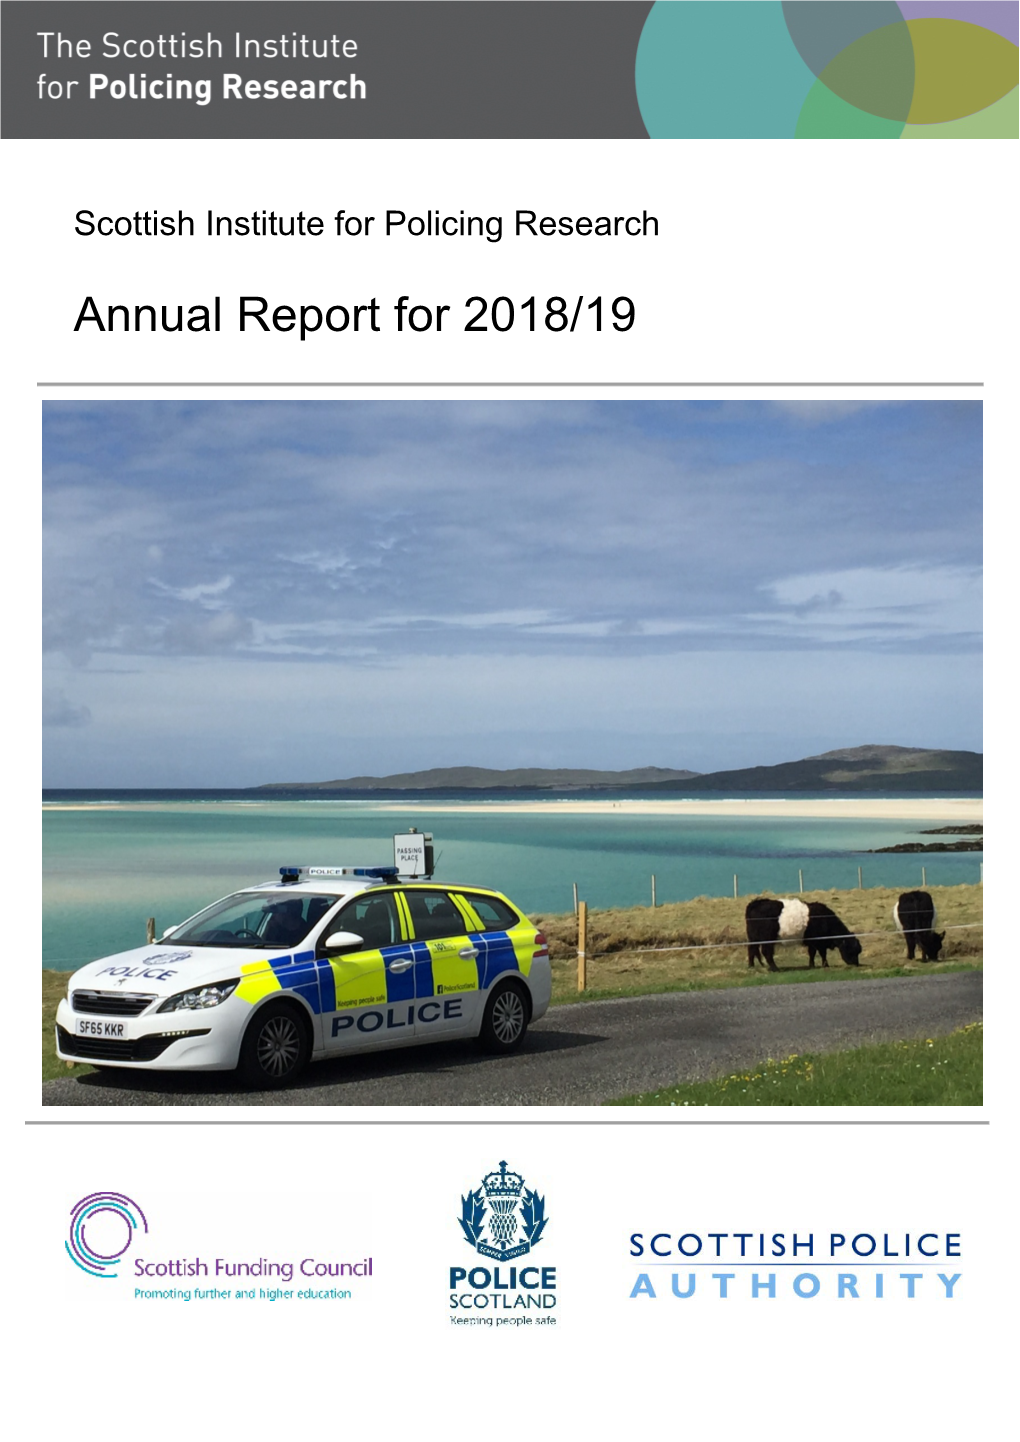 Annual Report for 2018/19